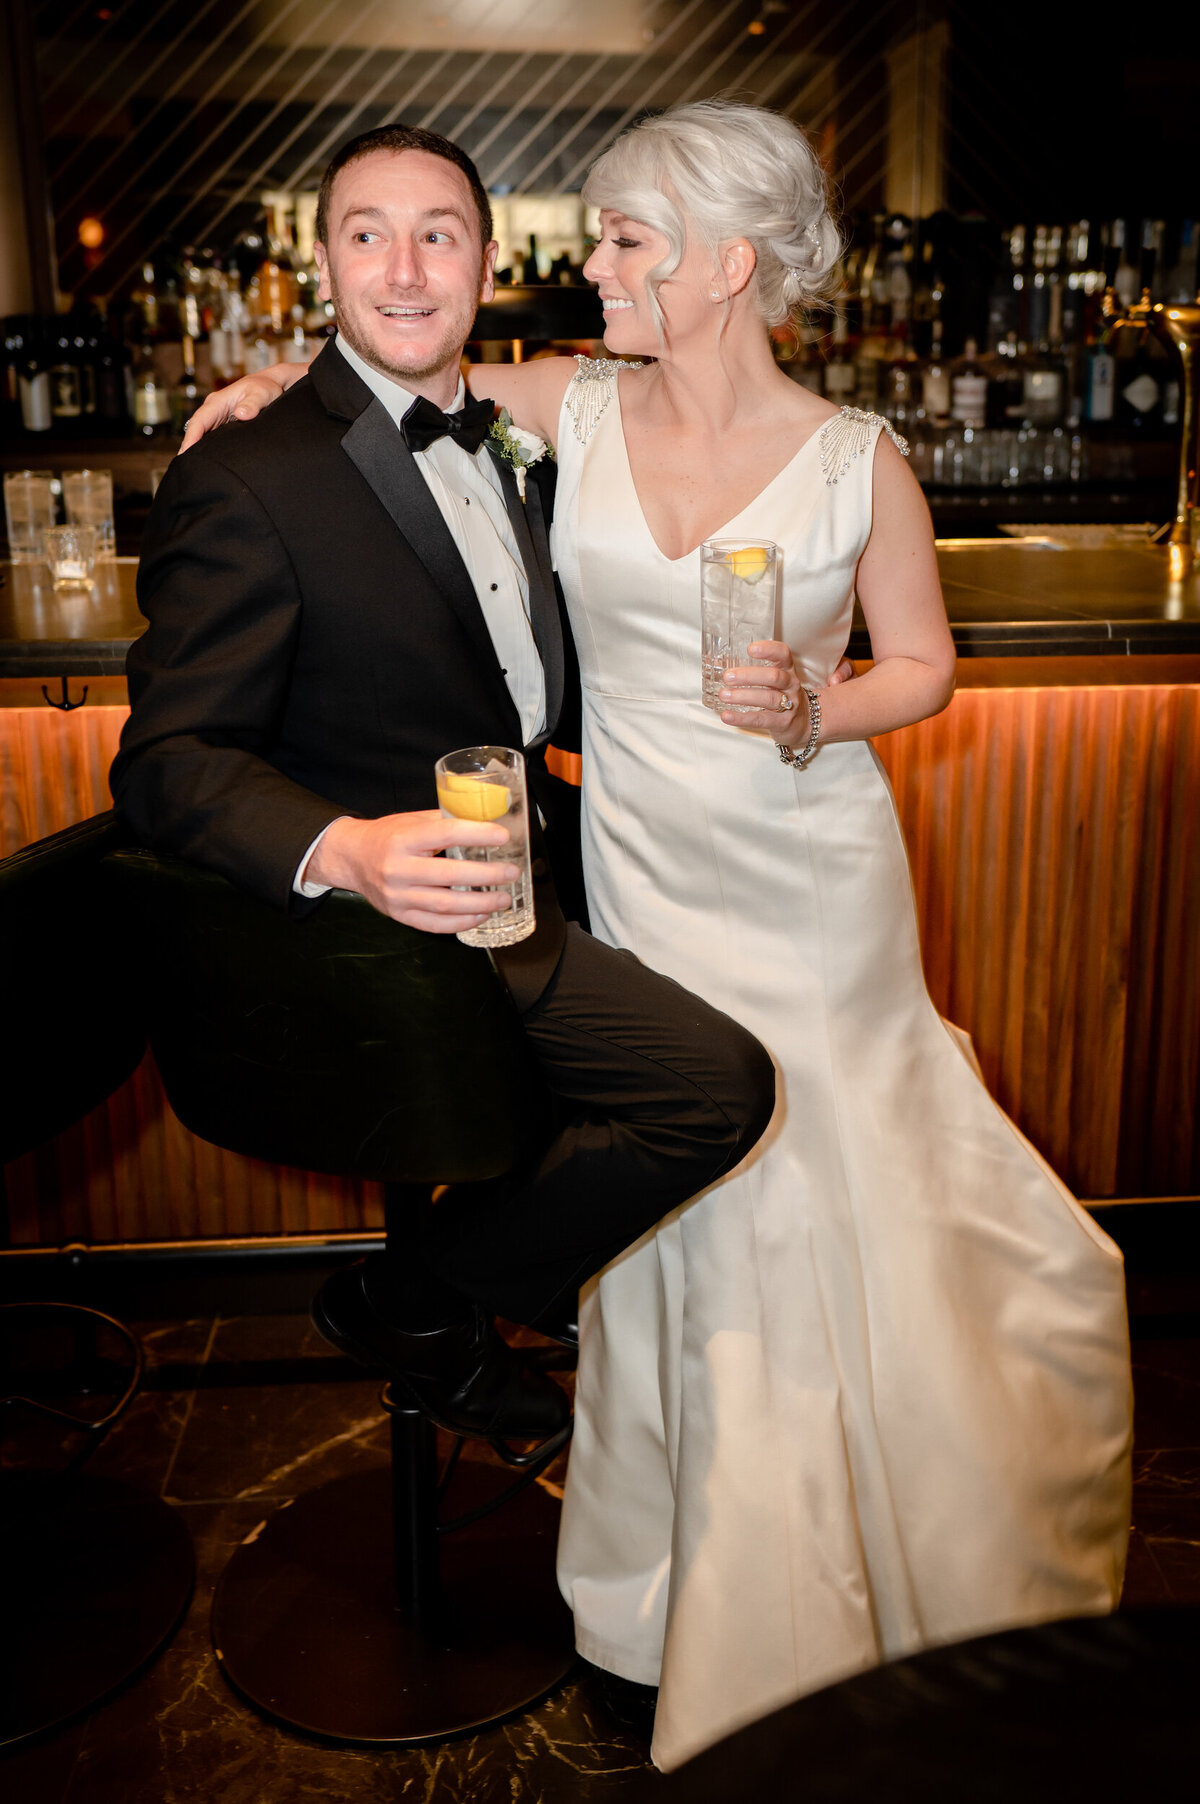 Bride and groom drink a gin and tonic at a Chicago bar during their wedding